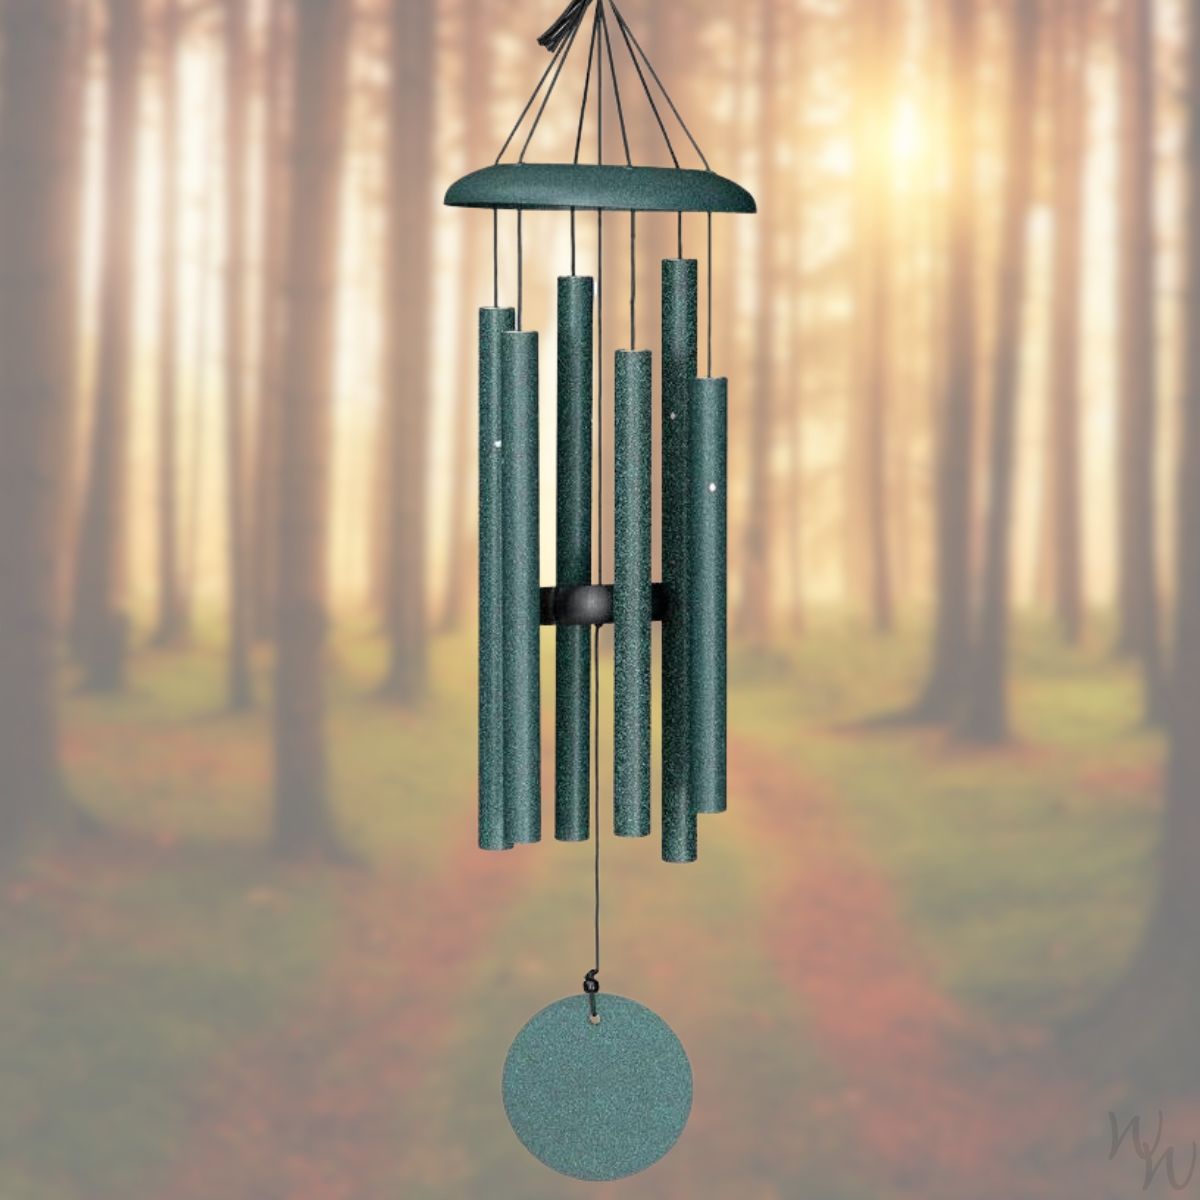 Corinthian Bells 27 Inch Green Wind Chime - Scale Of C